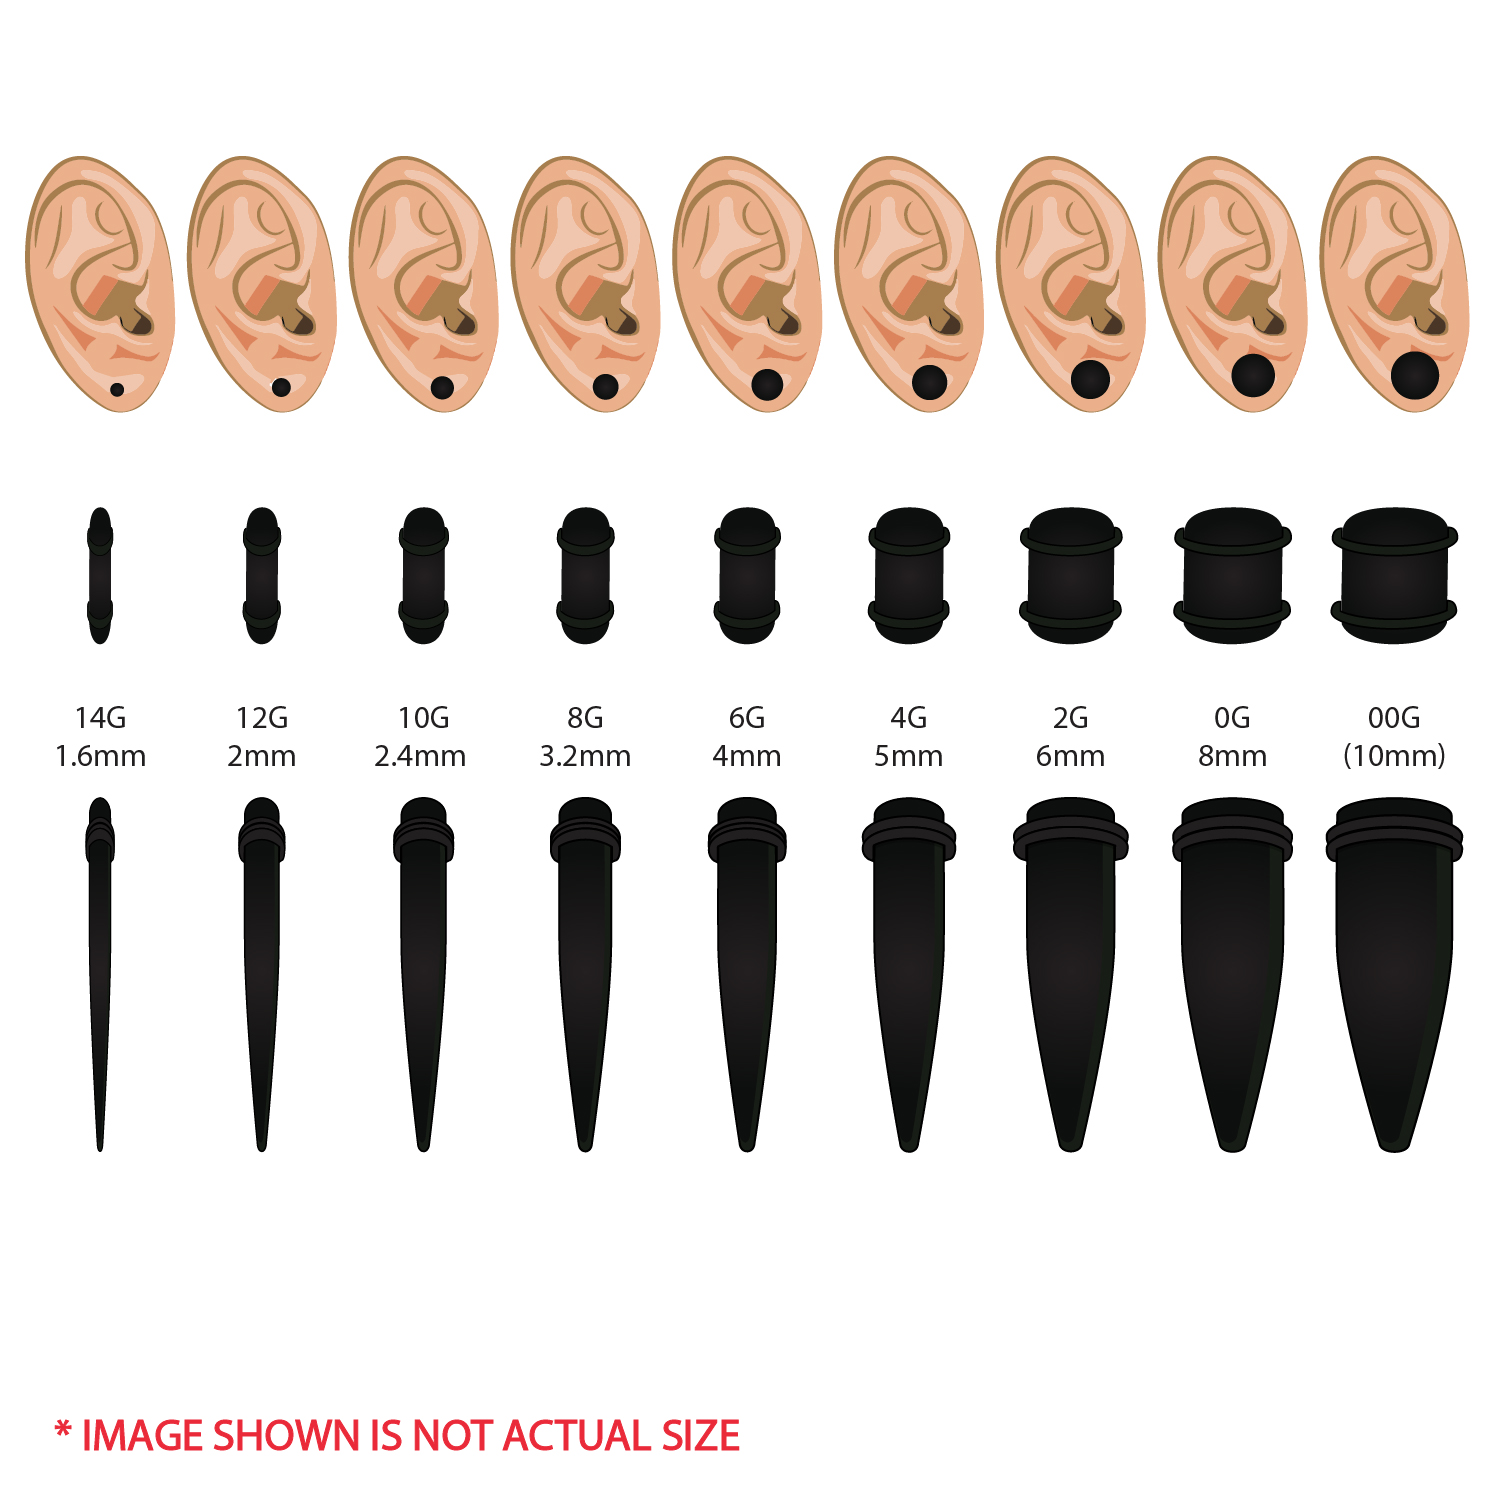 Ear Size Chart With Pictures